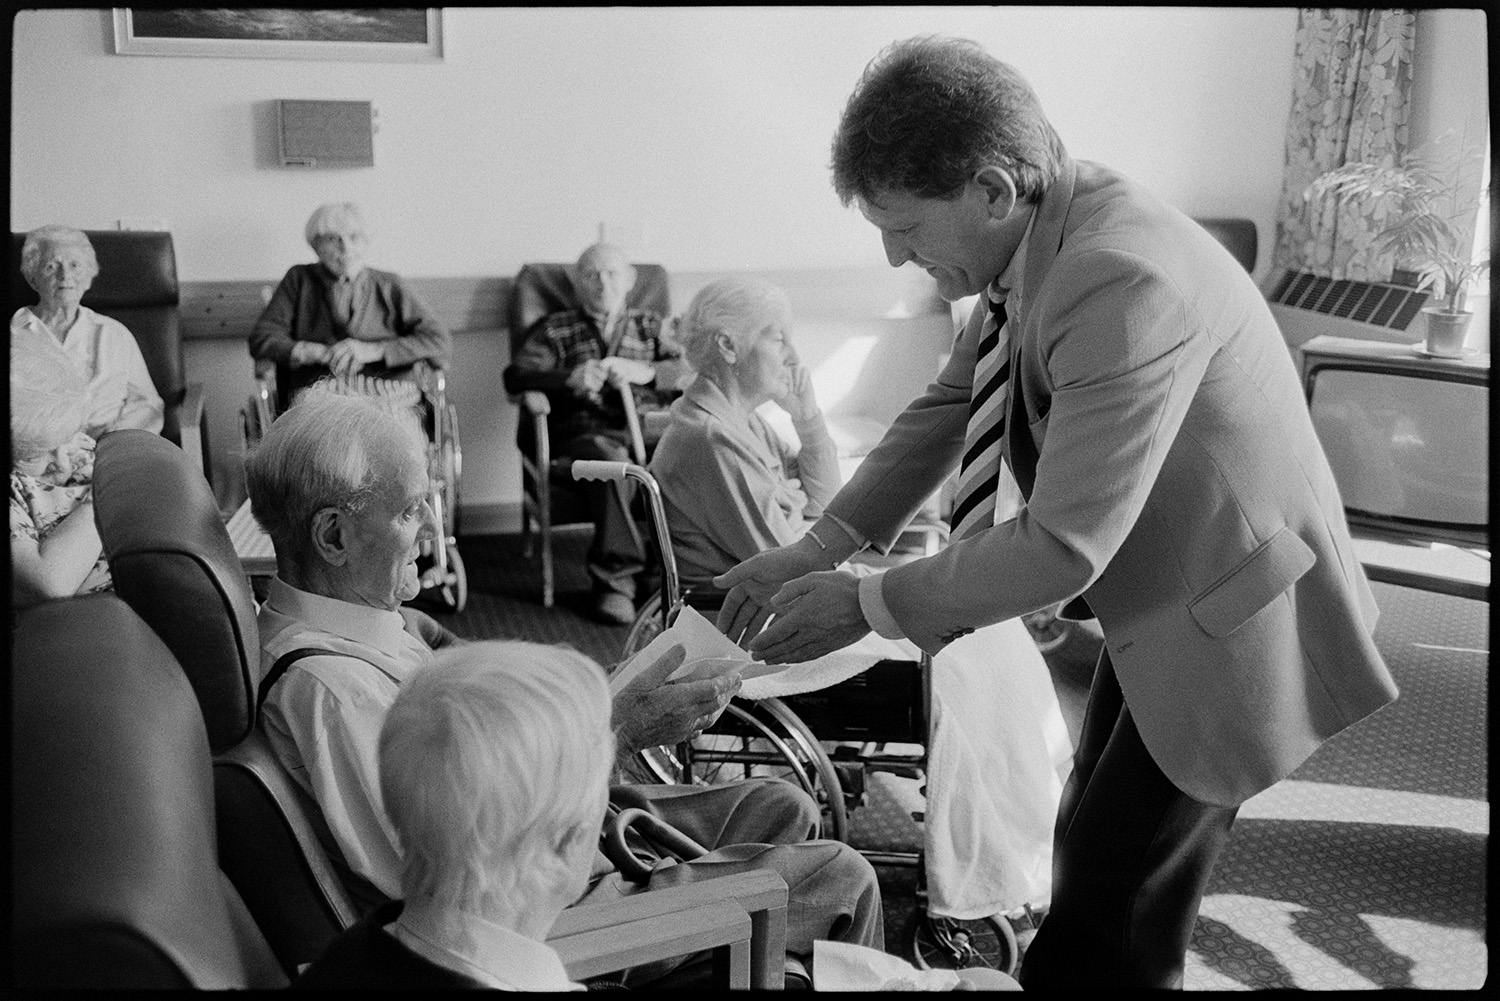 TV presenter at hospital event cutting cake.
[Ian Stirling, a TV presenter, handing a piece of cake to an elderly patient at an event in Barnstaple General Hospital. Other patients are sitting in chairs around the room.]